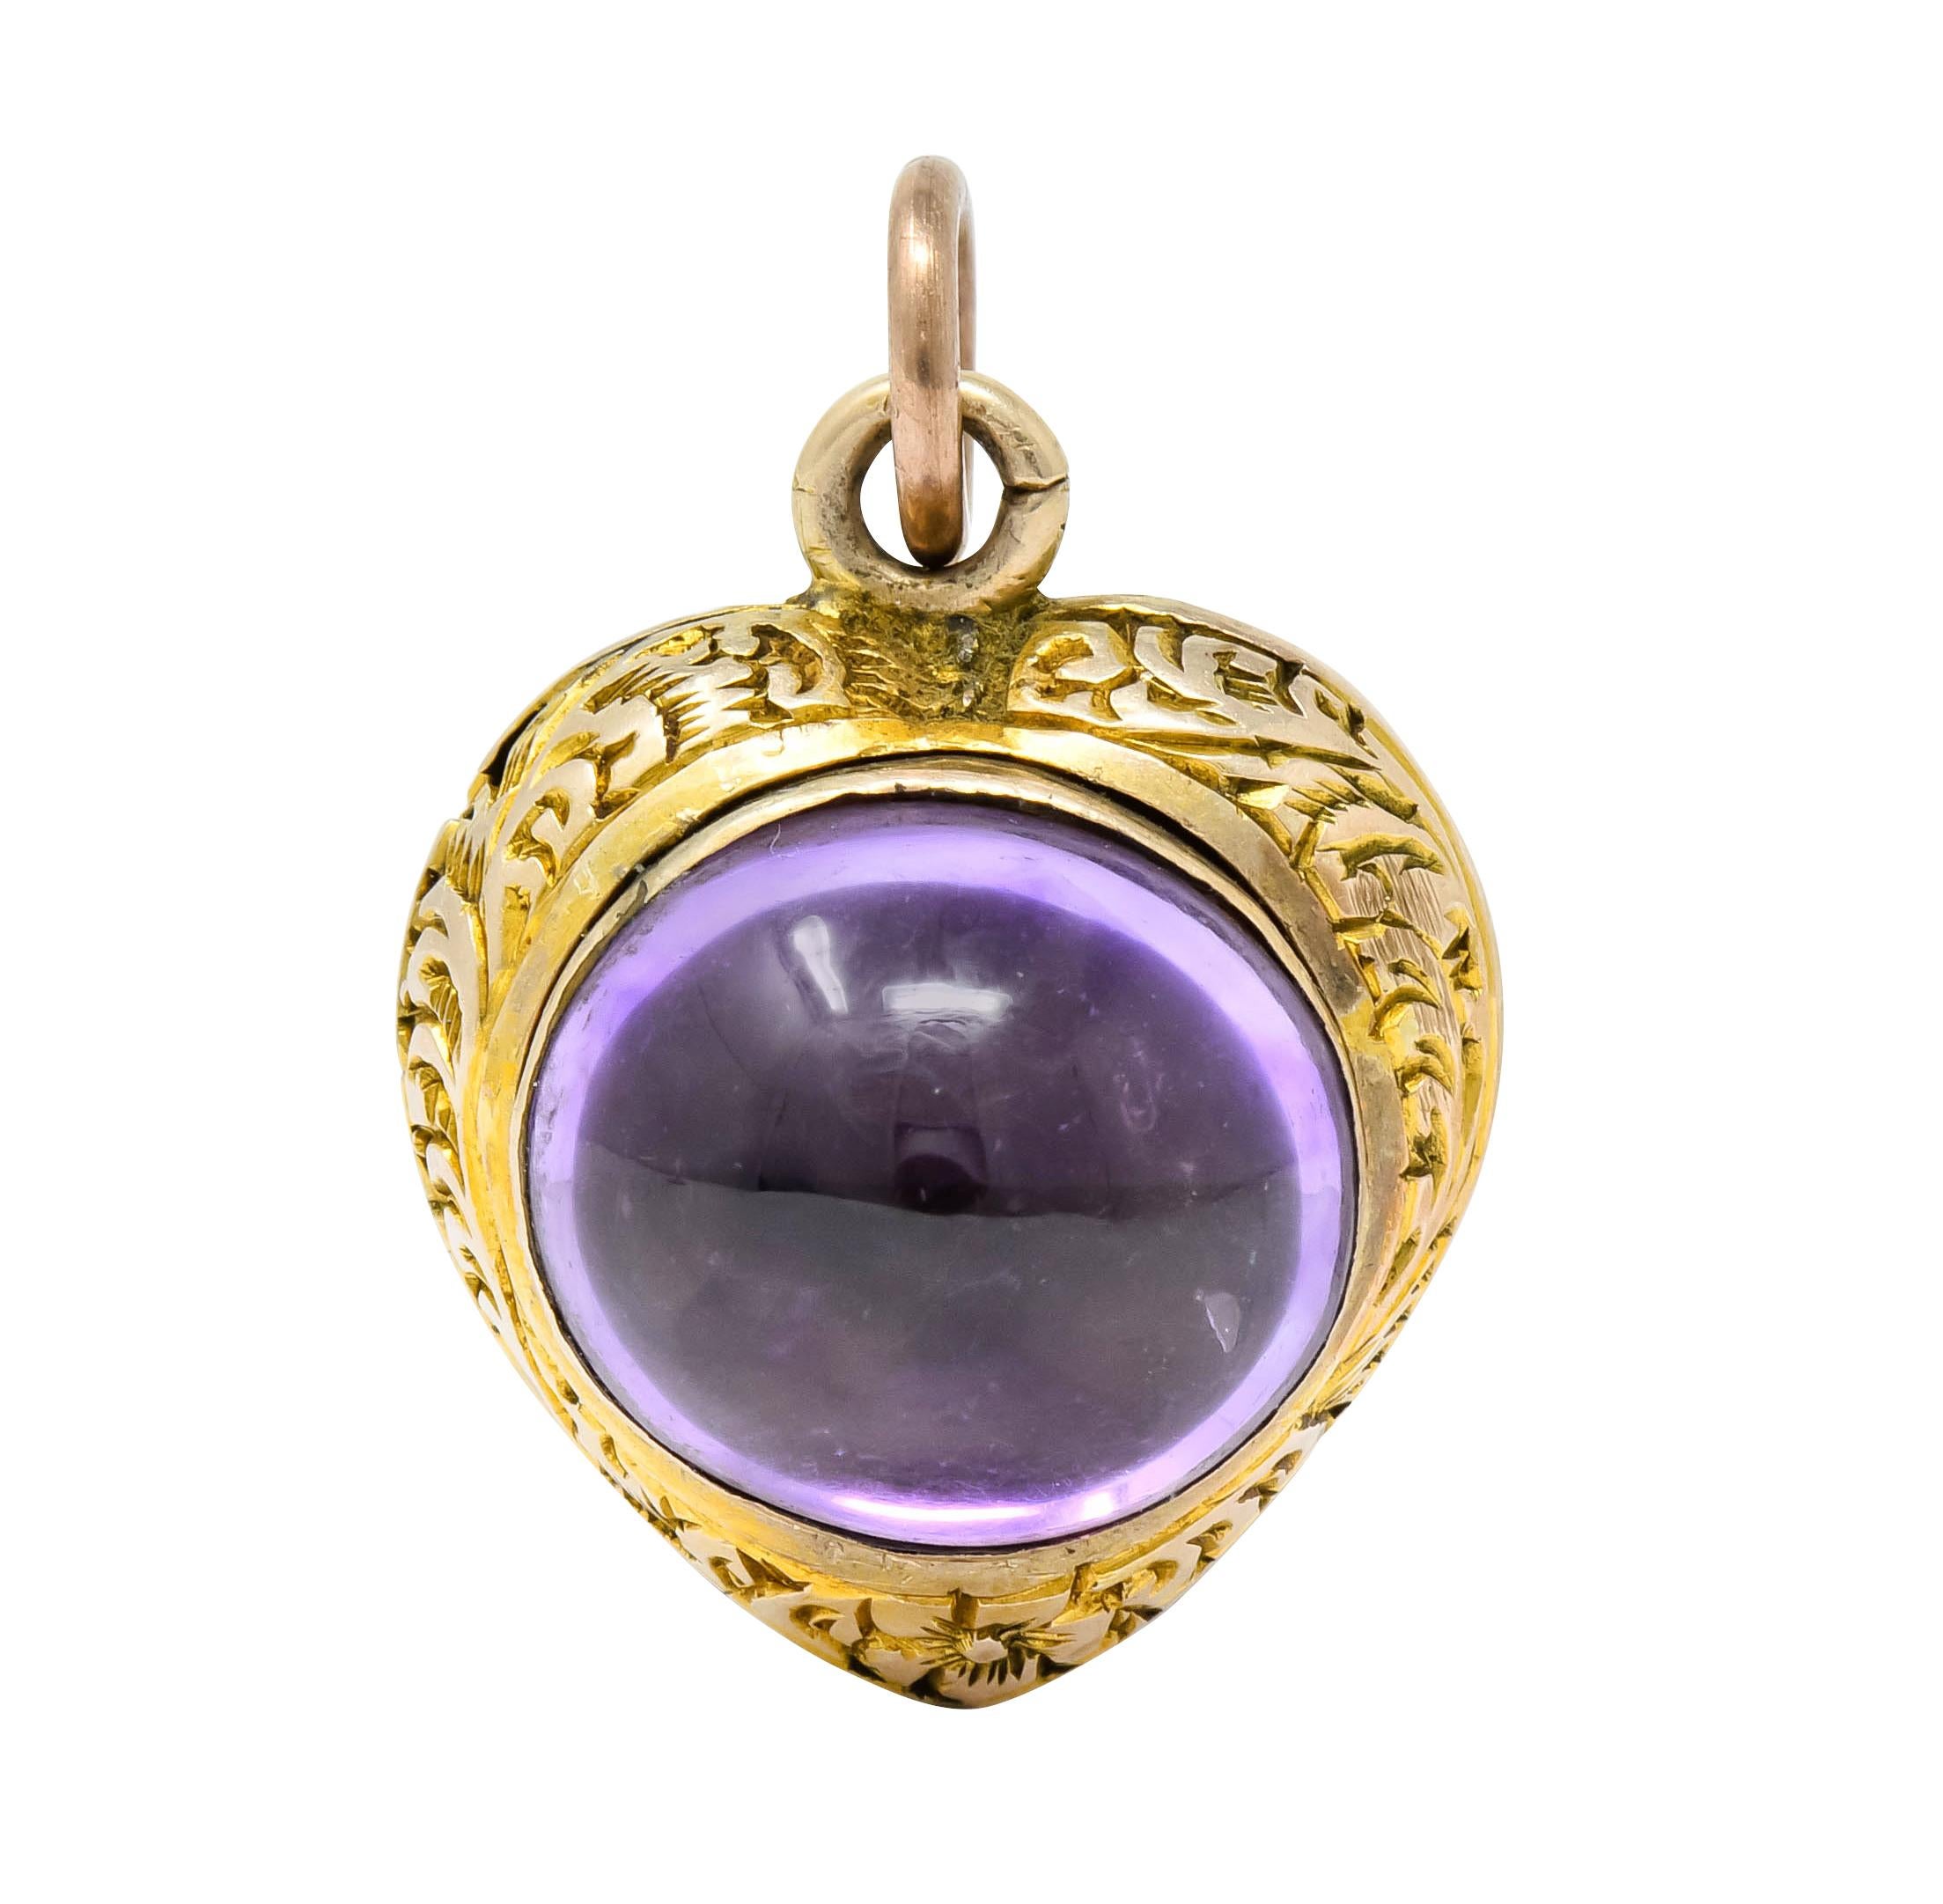 Charm designed as a heart deeply engraved with foliate motif throughout

One side bezel set with oval cabochon purple foil-backed stone measuring approximately 10.5 x 9.2 mm

Opposite side features three bezel set turquoise cabochon measuring